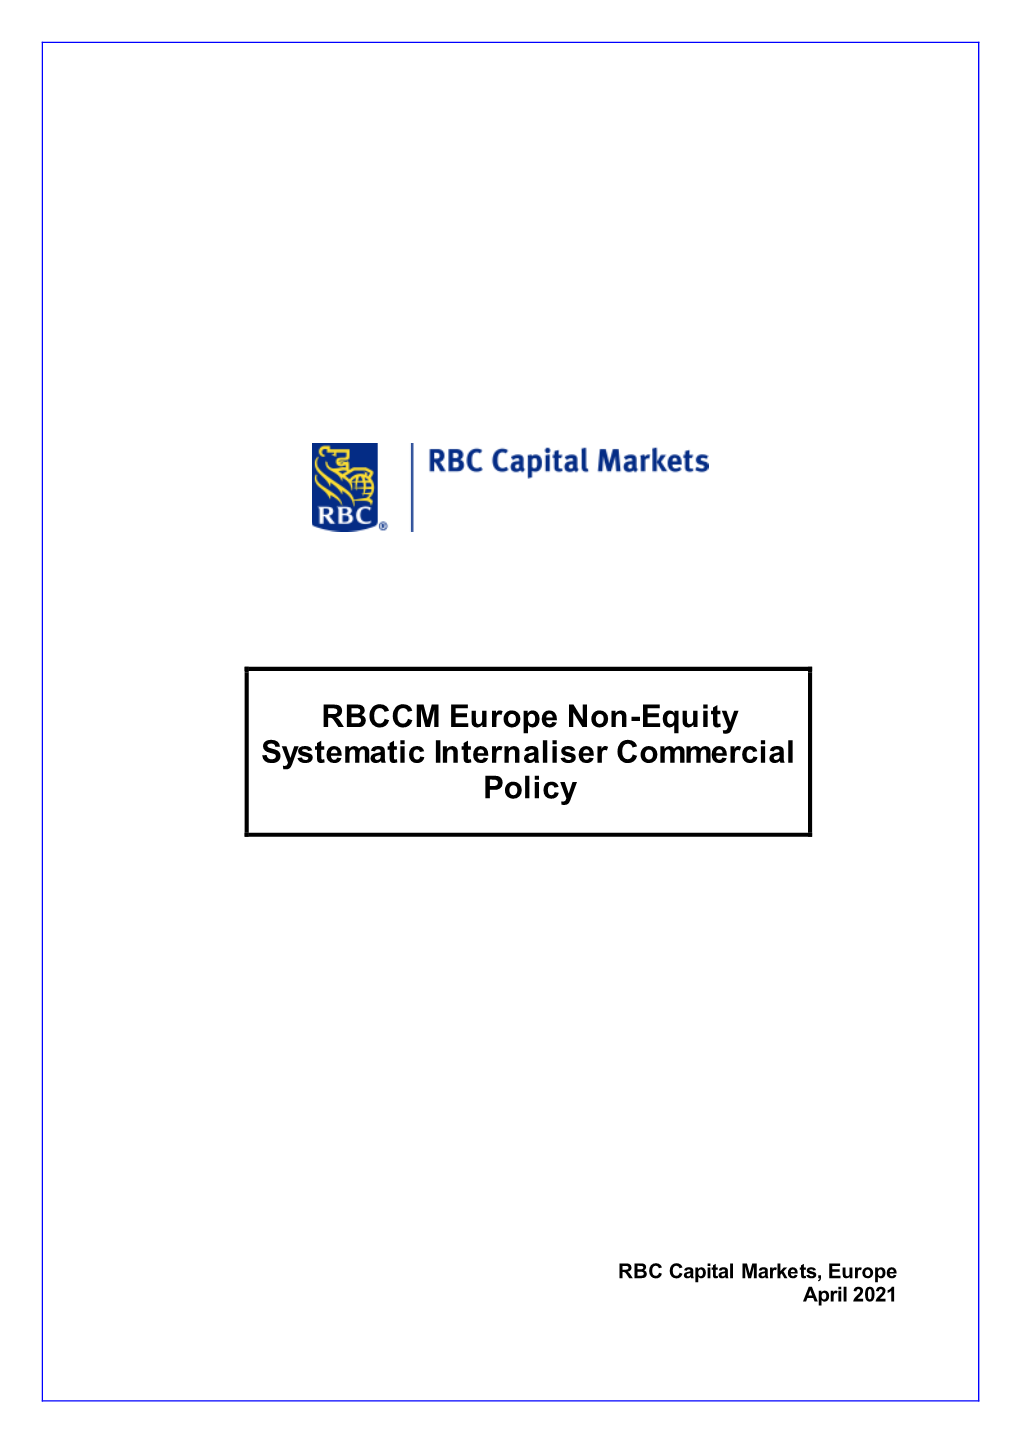 RBCCM Europe Non-Equity Systematic Internaliser Commercial Policy